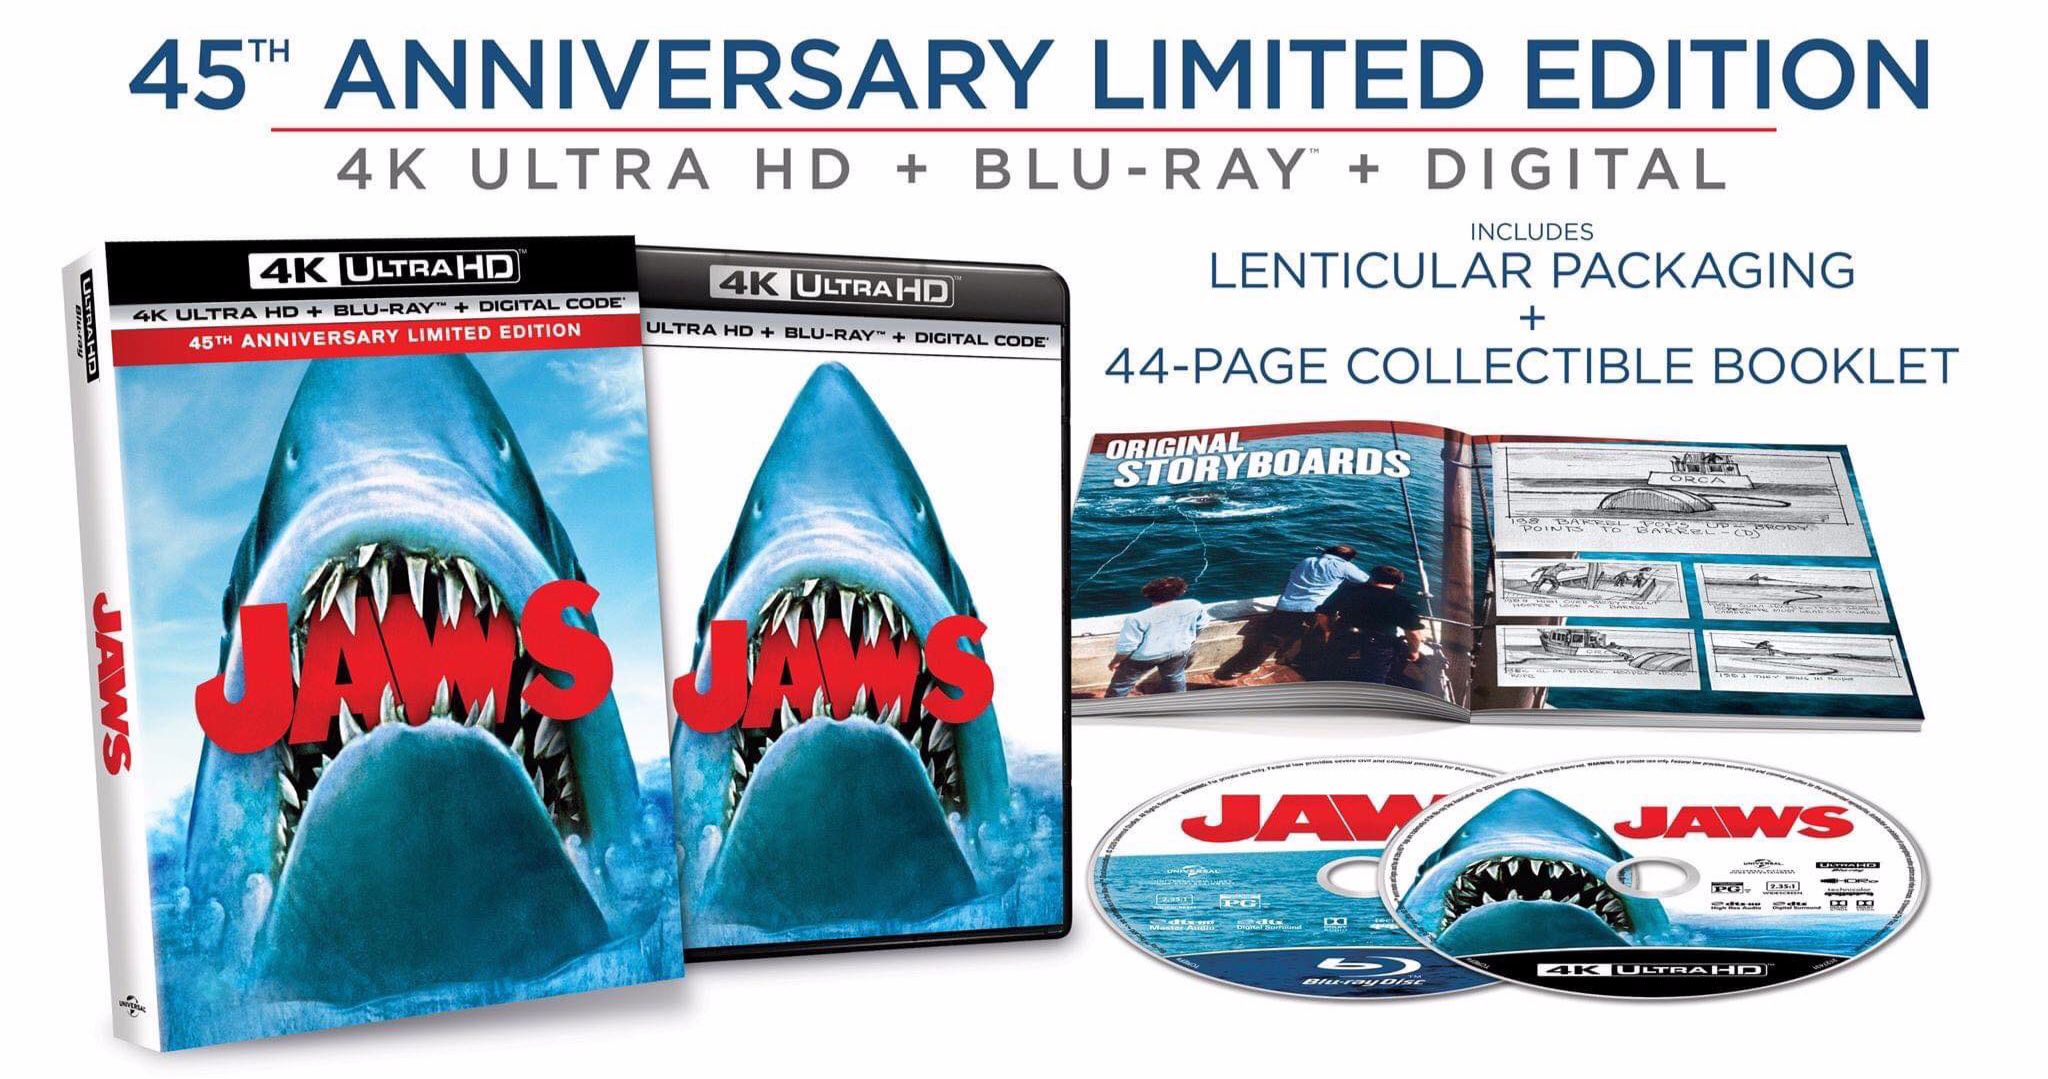 Jaws 4K Ultra HD 45th Anniversary Release Is Coming This Summer